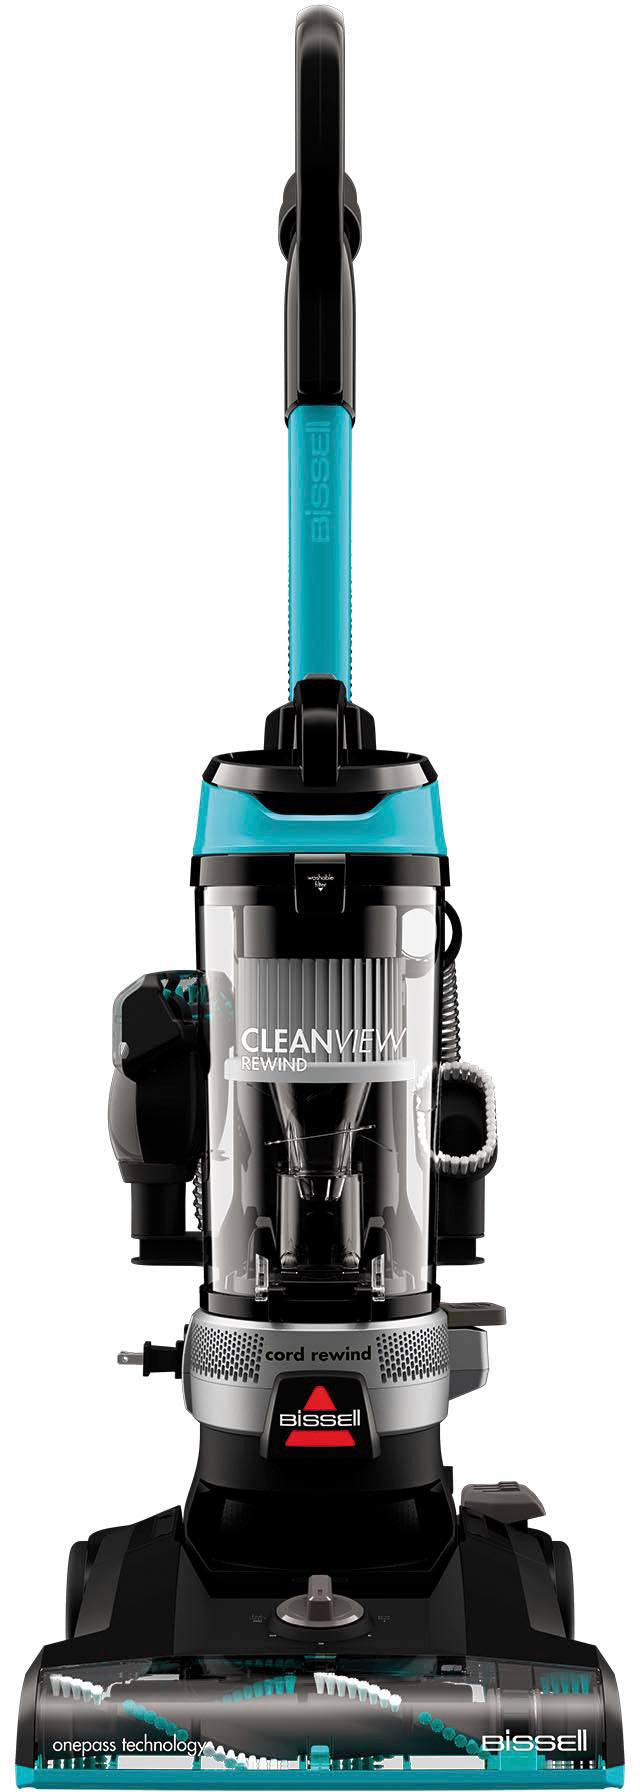 BISSELL - CleanView Rewind Upright Vacuum Cleaner - Black with Electric Blue accents_0